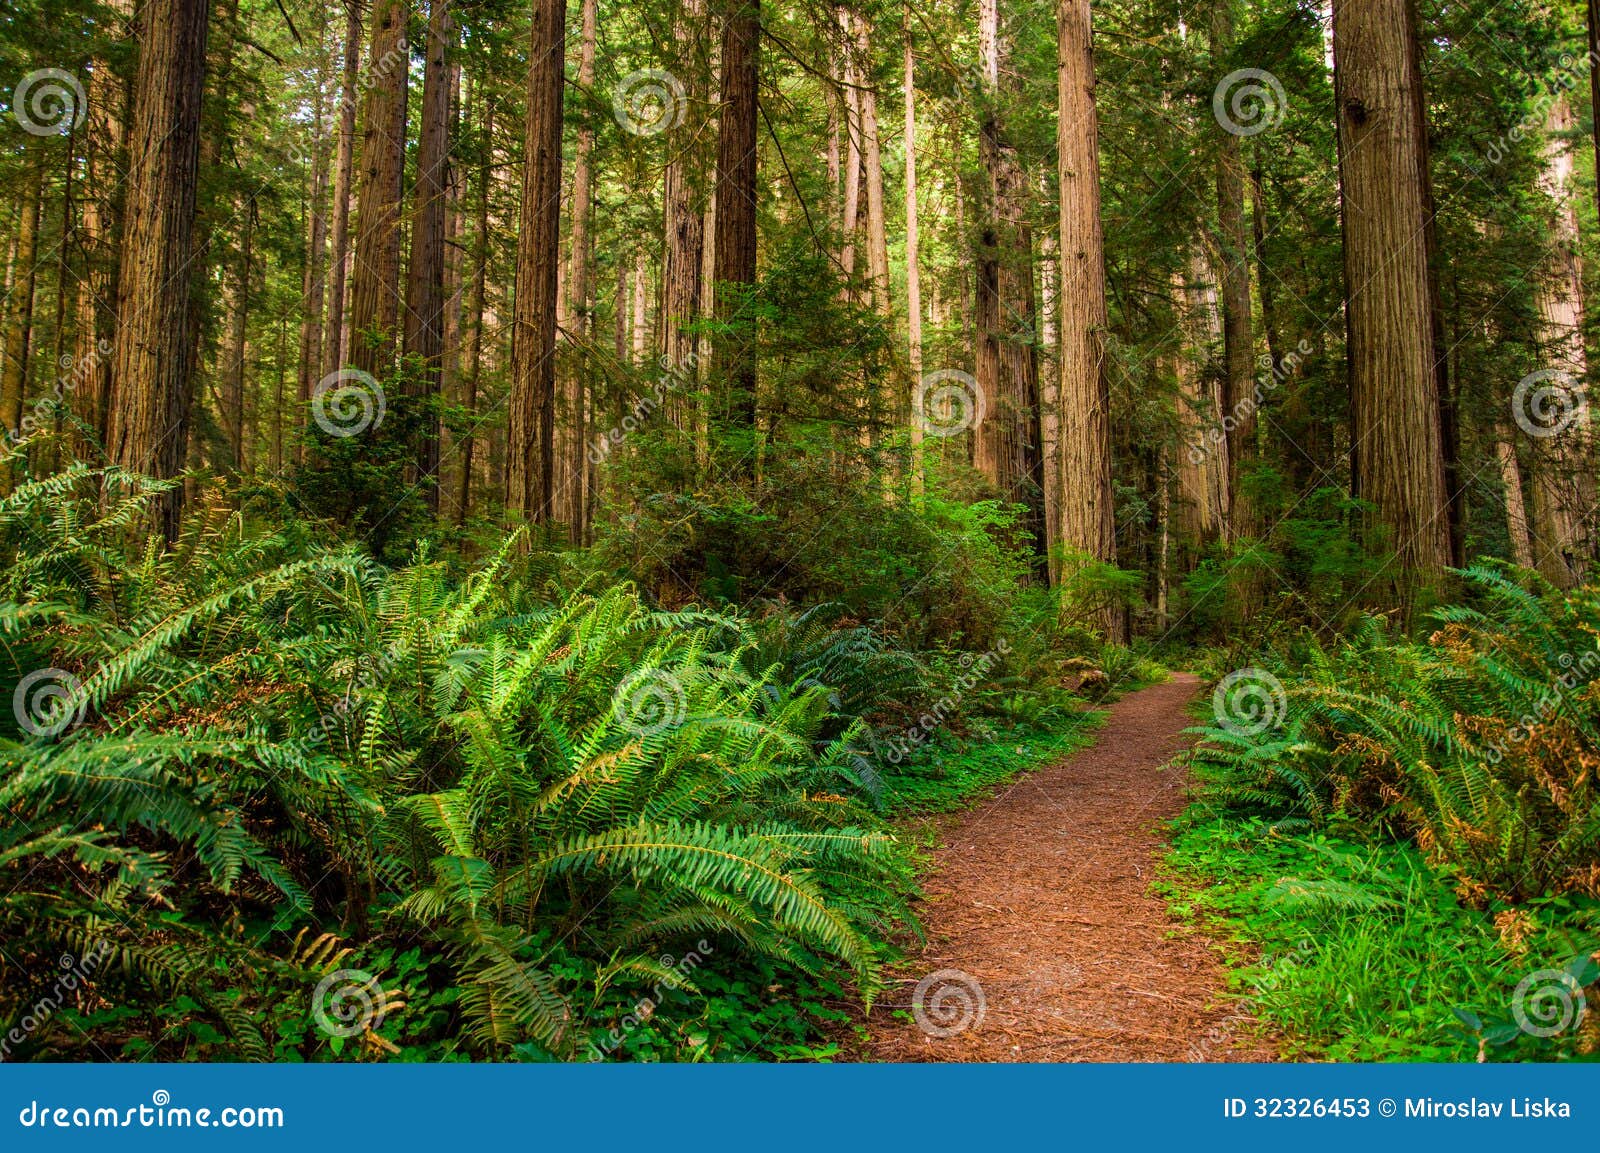 hiking path in redwood forest